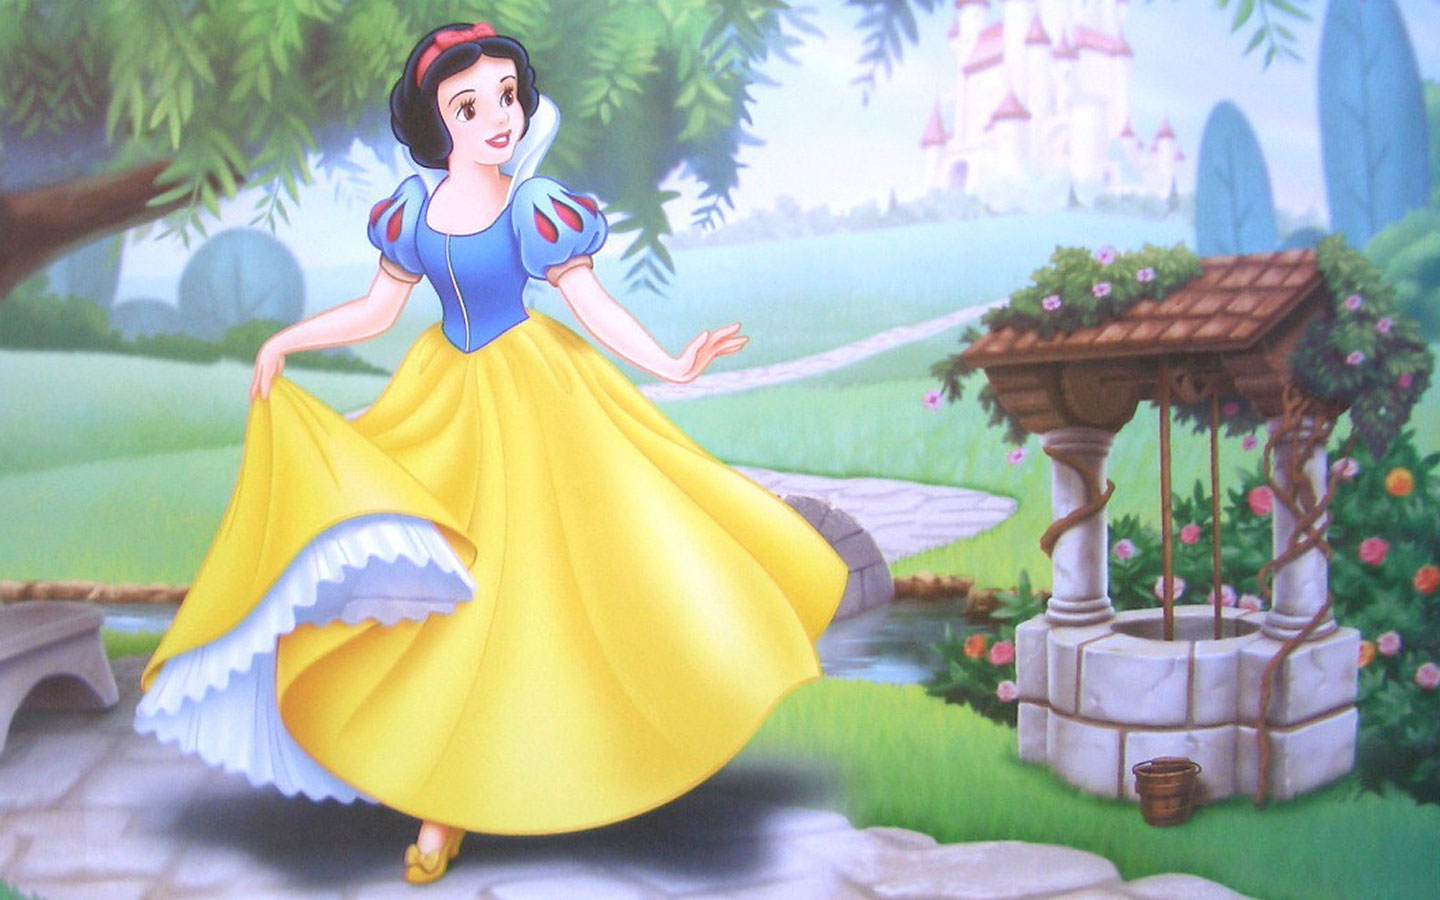 Wallpaper Princess Snow White By The Well